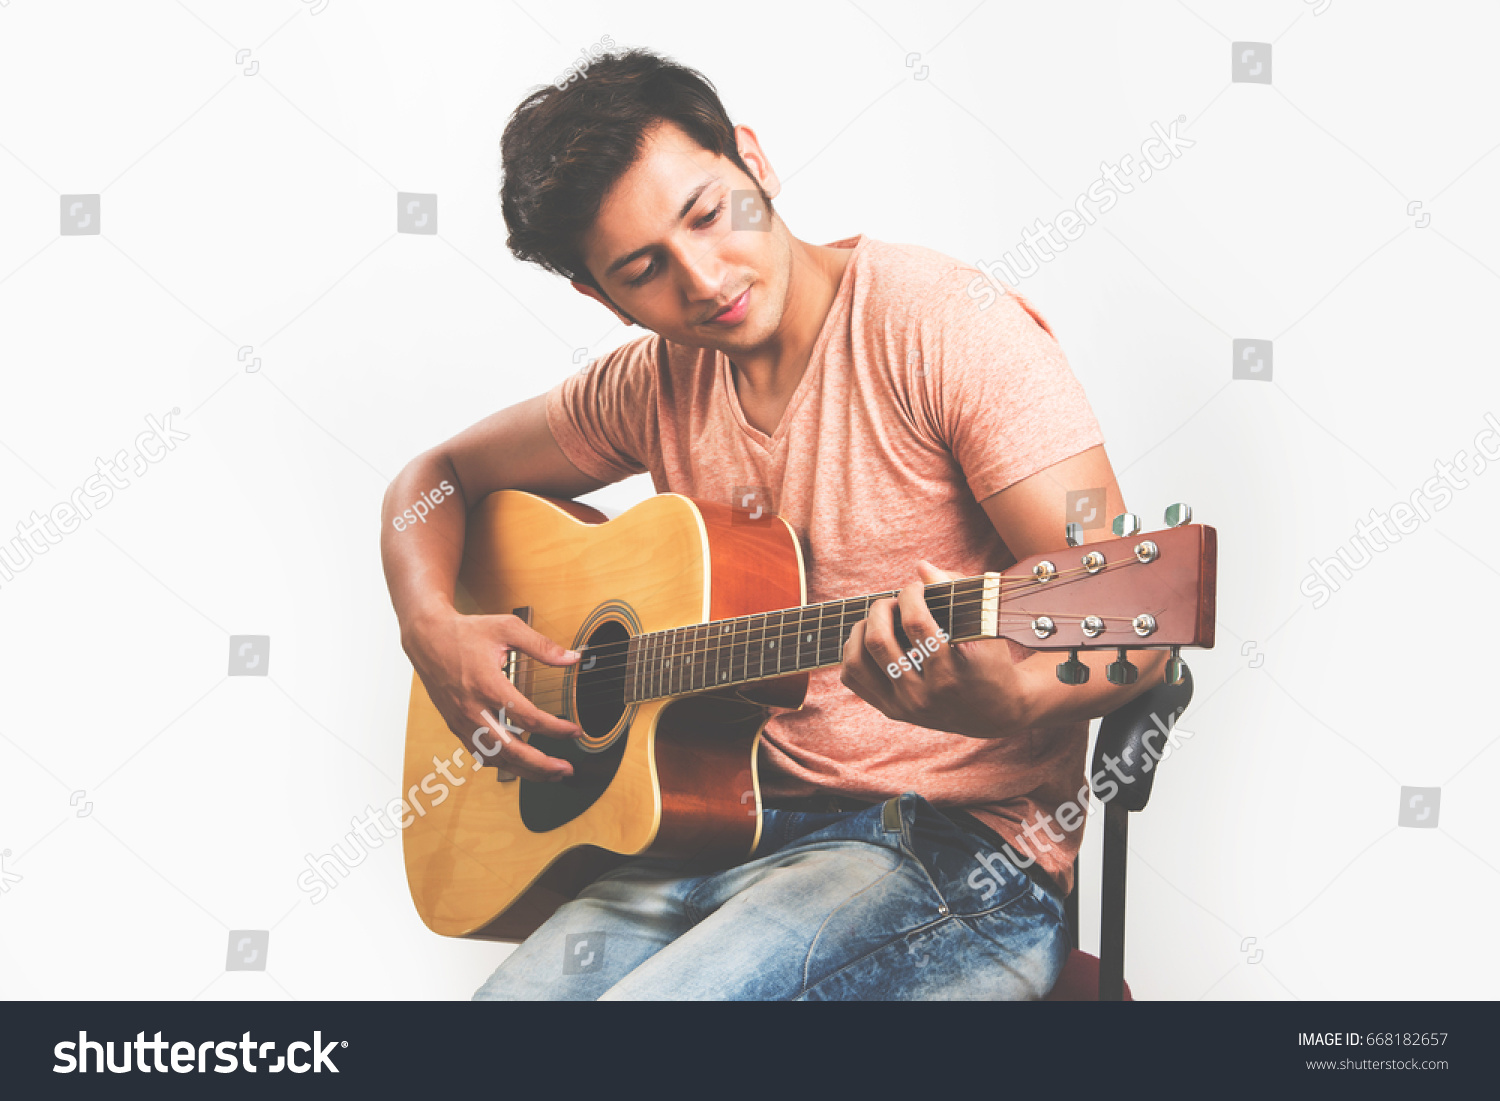 Indian/Asian young man playing Guitar, sitting against white background #668182657